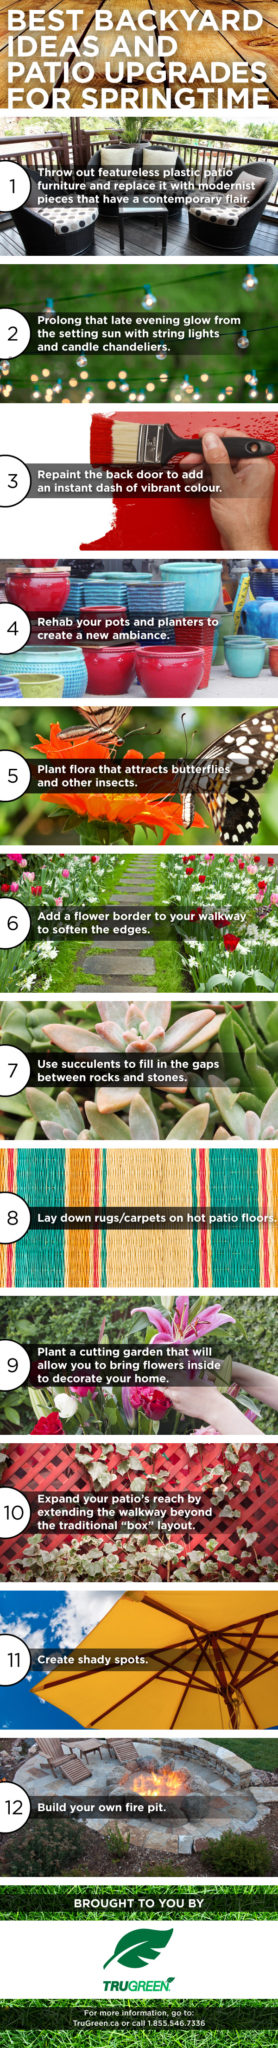 Simple Ways To Brighten Up Your Backyard This Spring